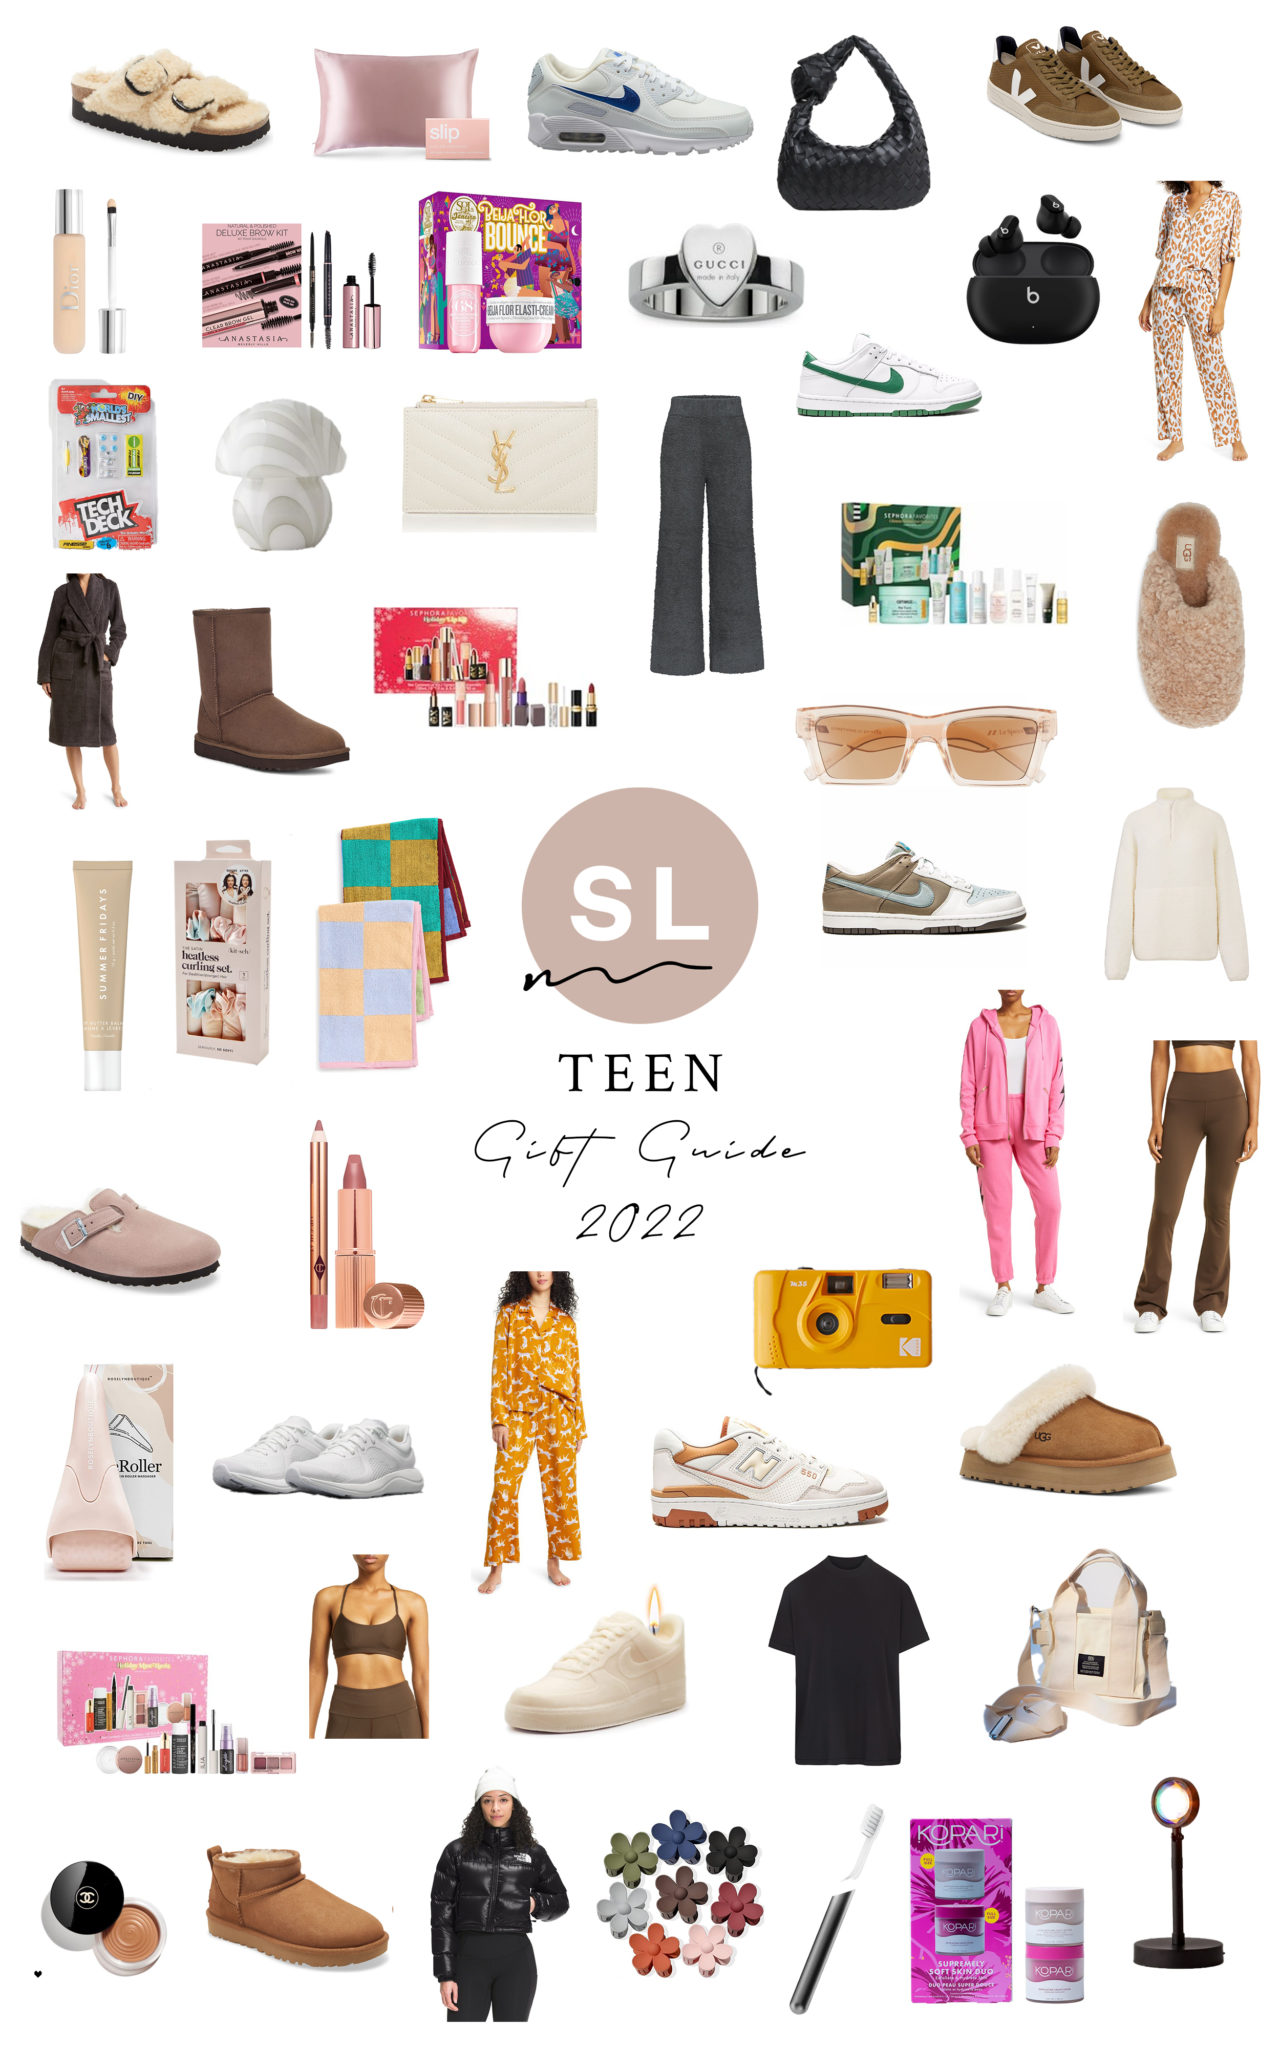 Holiday Gift Guide 2019 - For the Teenagers  Birthday gifts for teens,  Teenager gifts, Teenage girl gifts